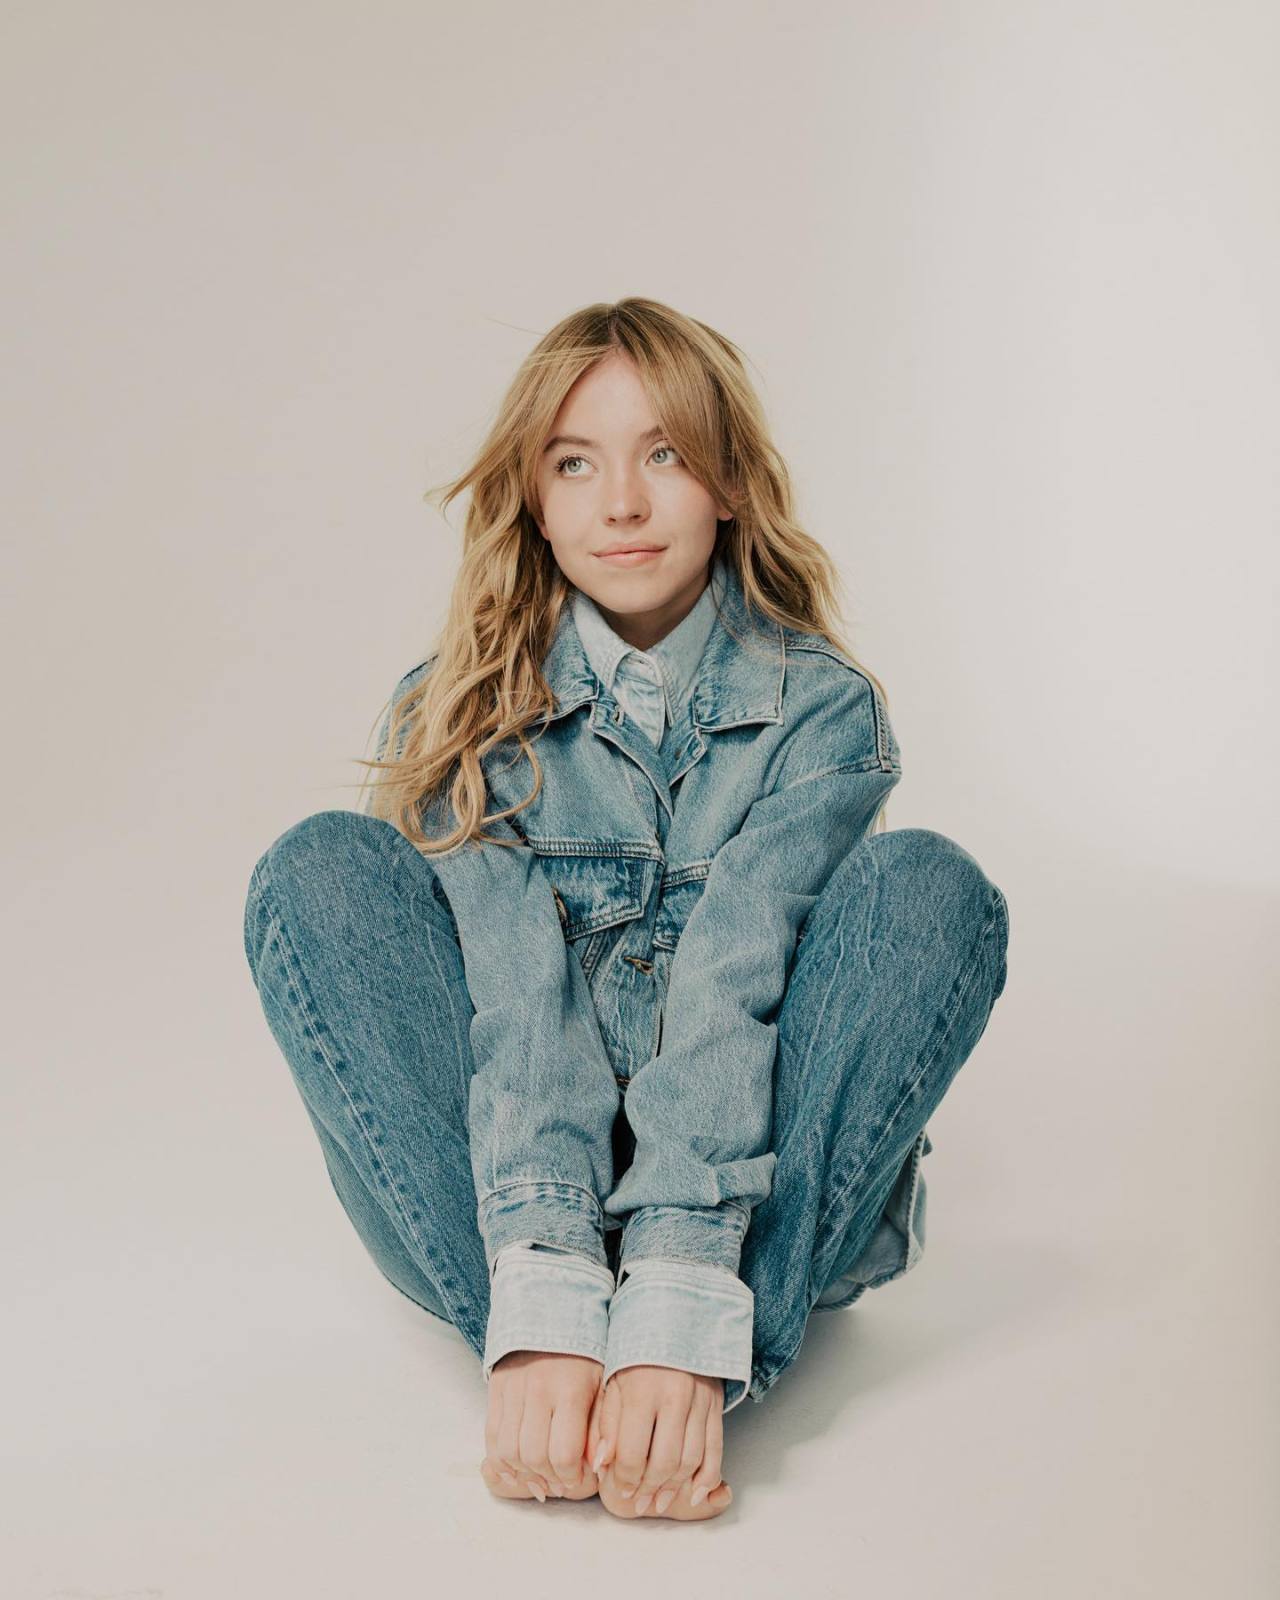 I am posting Sydney Sweeney today cause it's my blog and I can do what I want. So take that make believe person who is upset 